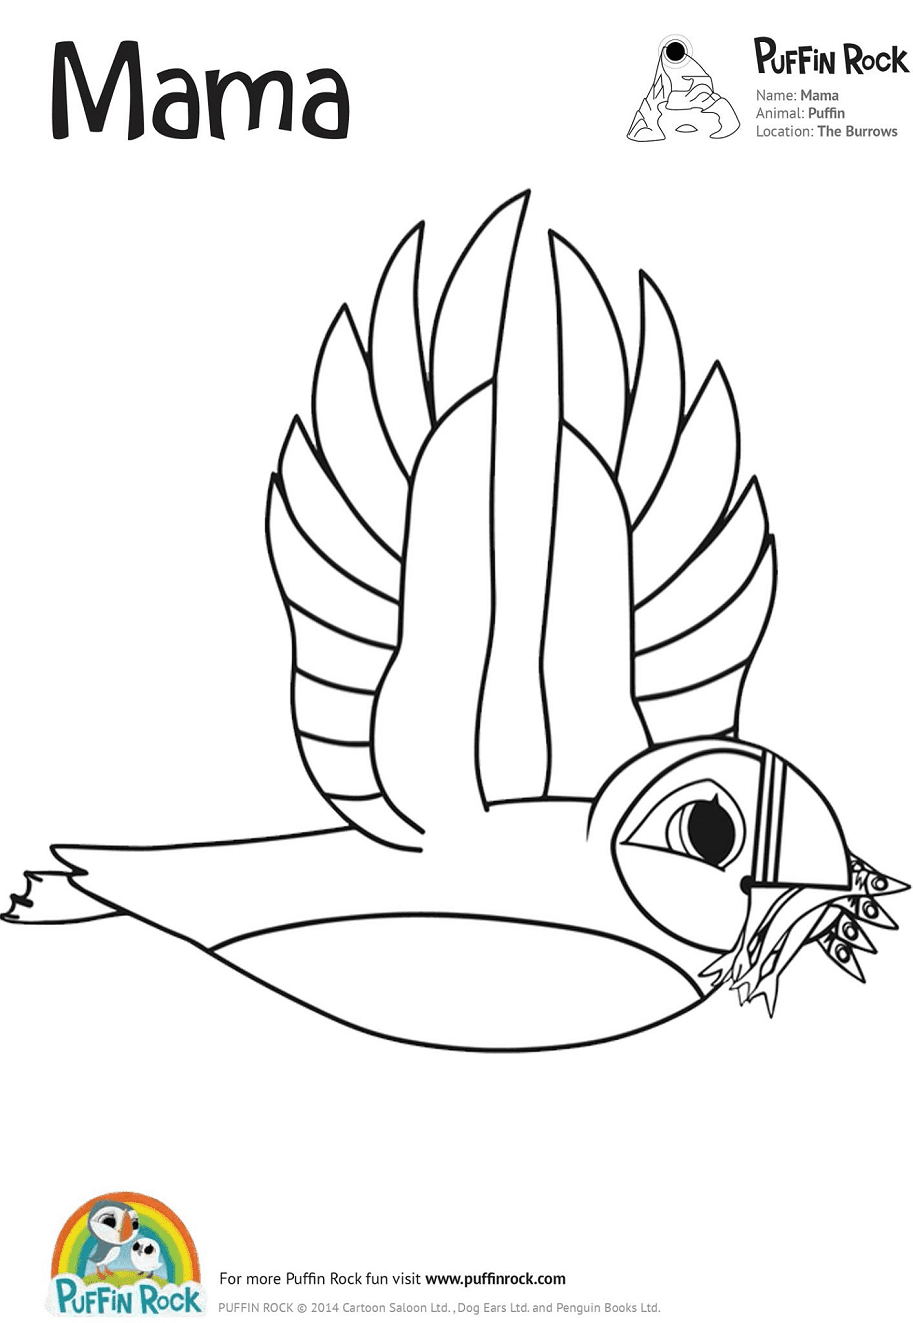 Mama from Puffin Rock Coloring Pages